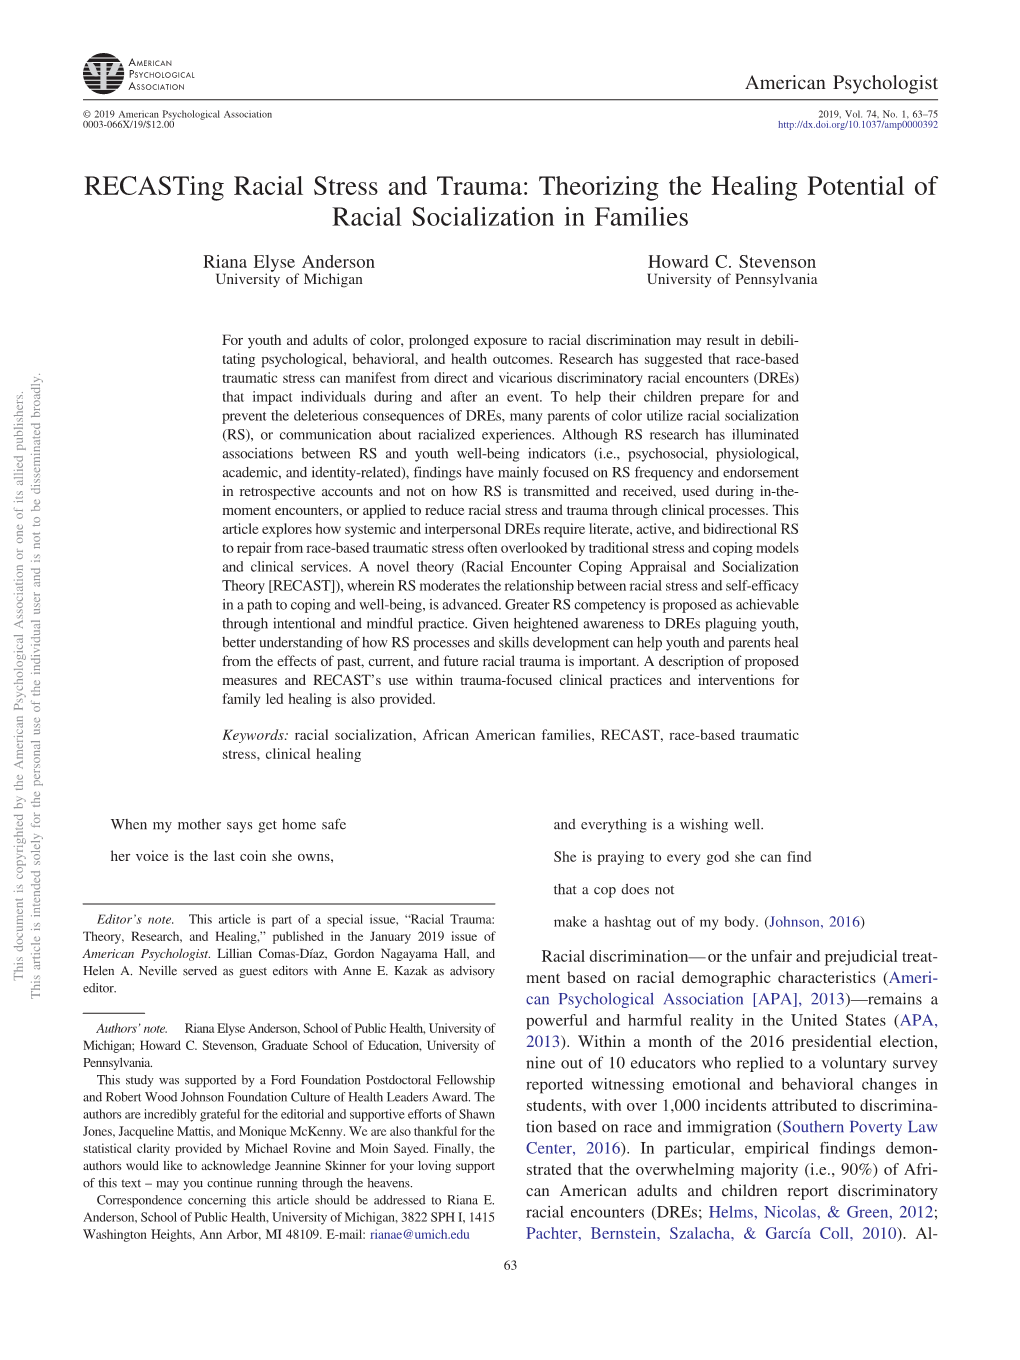 Recasting Racial Stress and Trauma: Theorizing the Healing Potential of Racial Socialization in Families